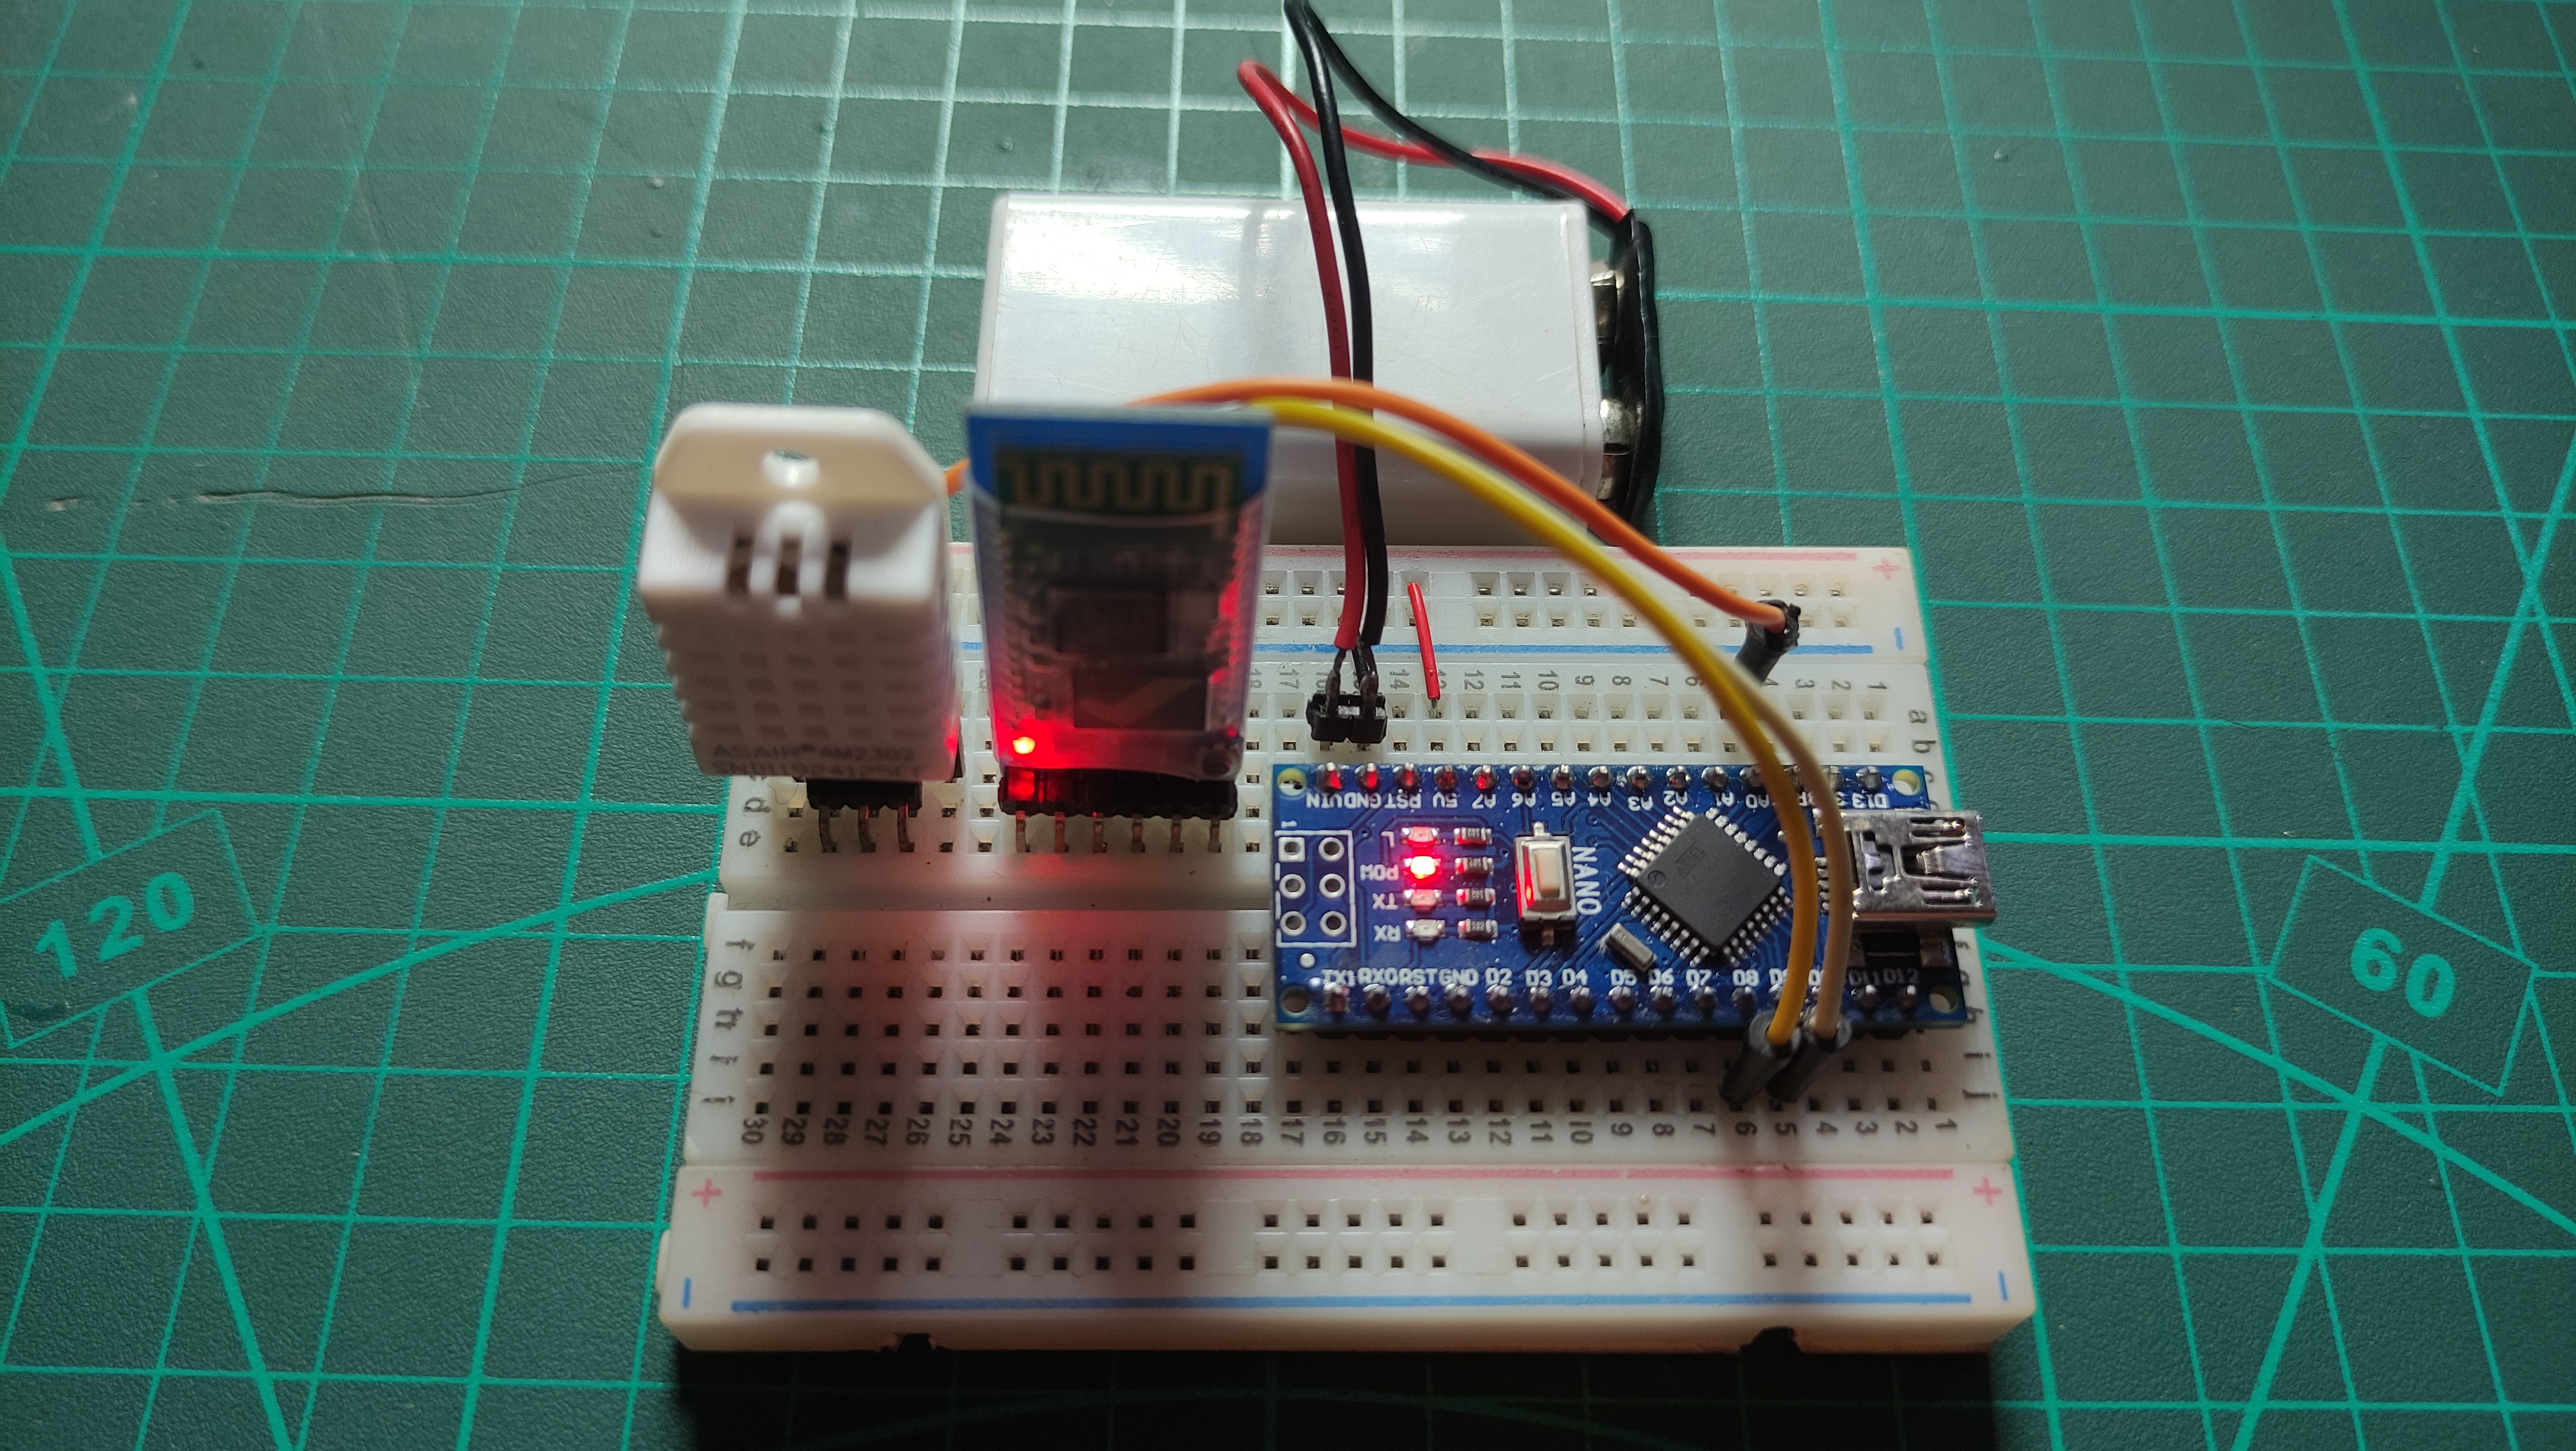 https://hackster.imgix.net/uploads/attachments/1469929/how_to_make_wireless_temperature_and_humidity_monitoring_system_by_bluetooth_dht-22_sensor_(3)_rnfEIF5rw3.jpg